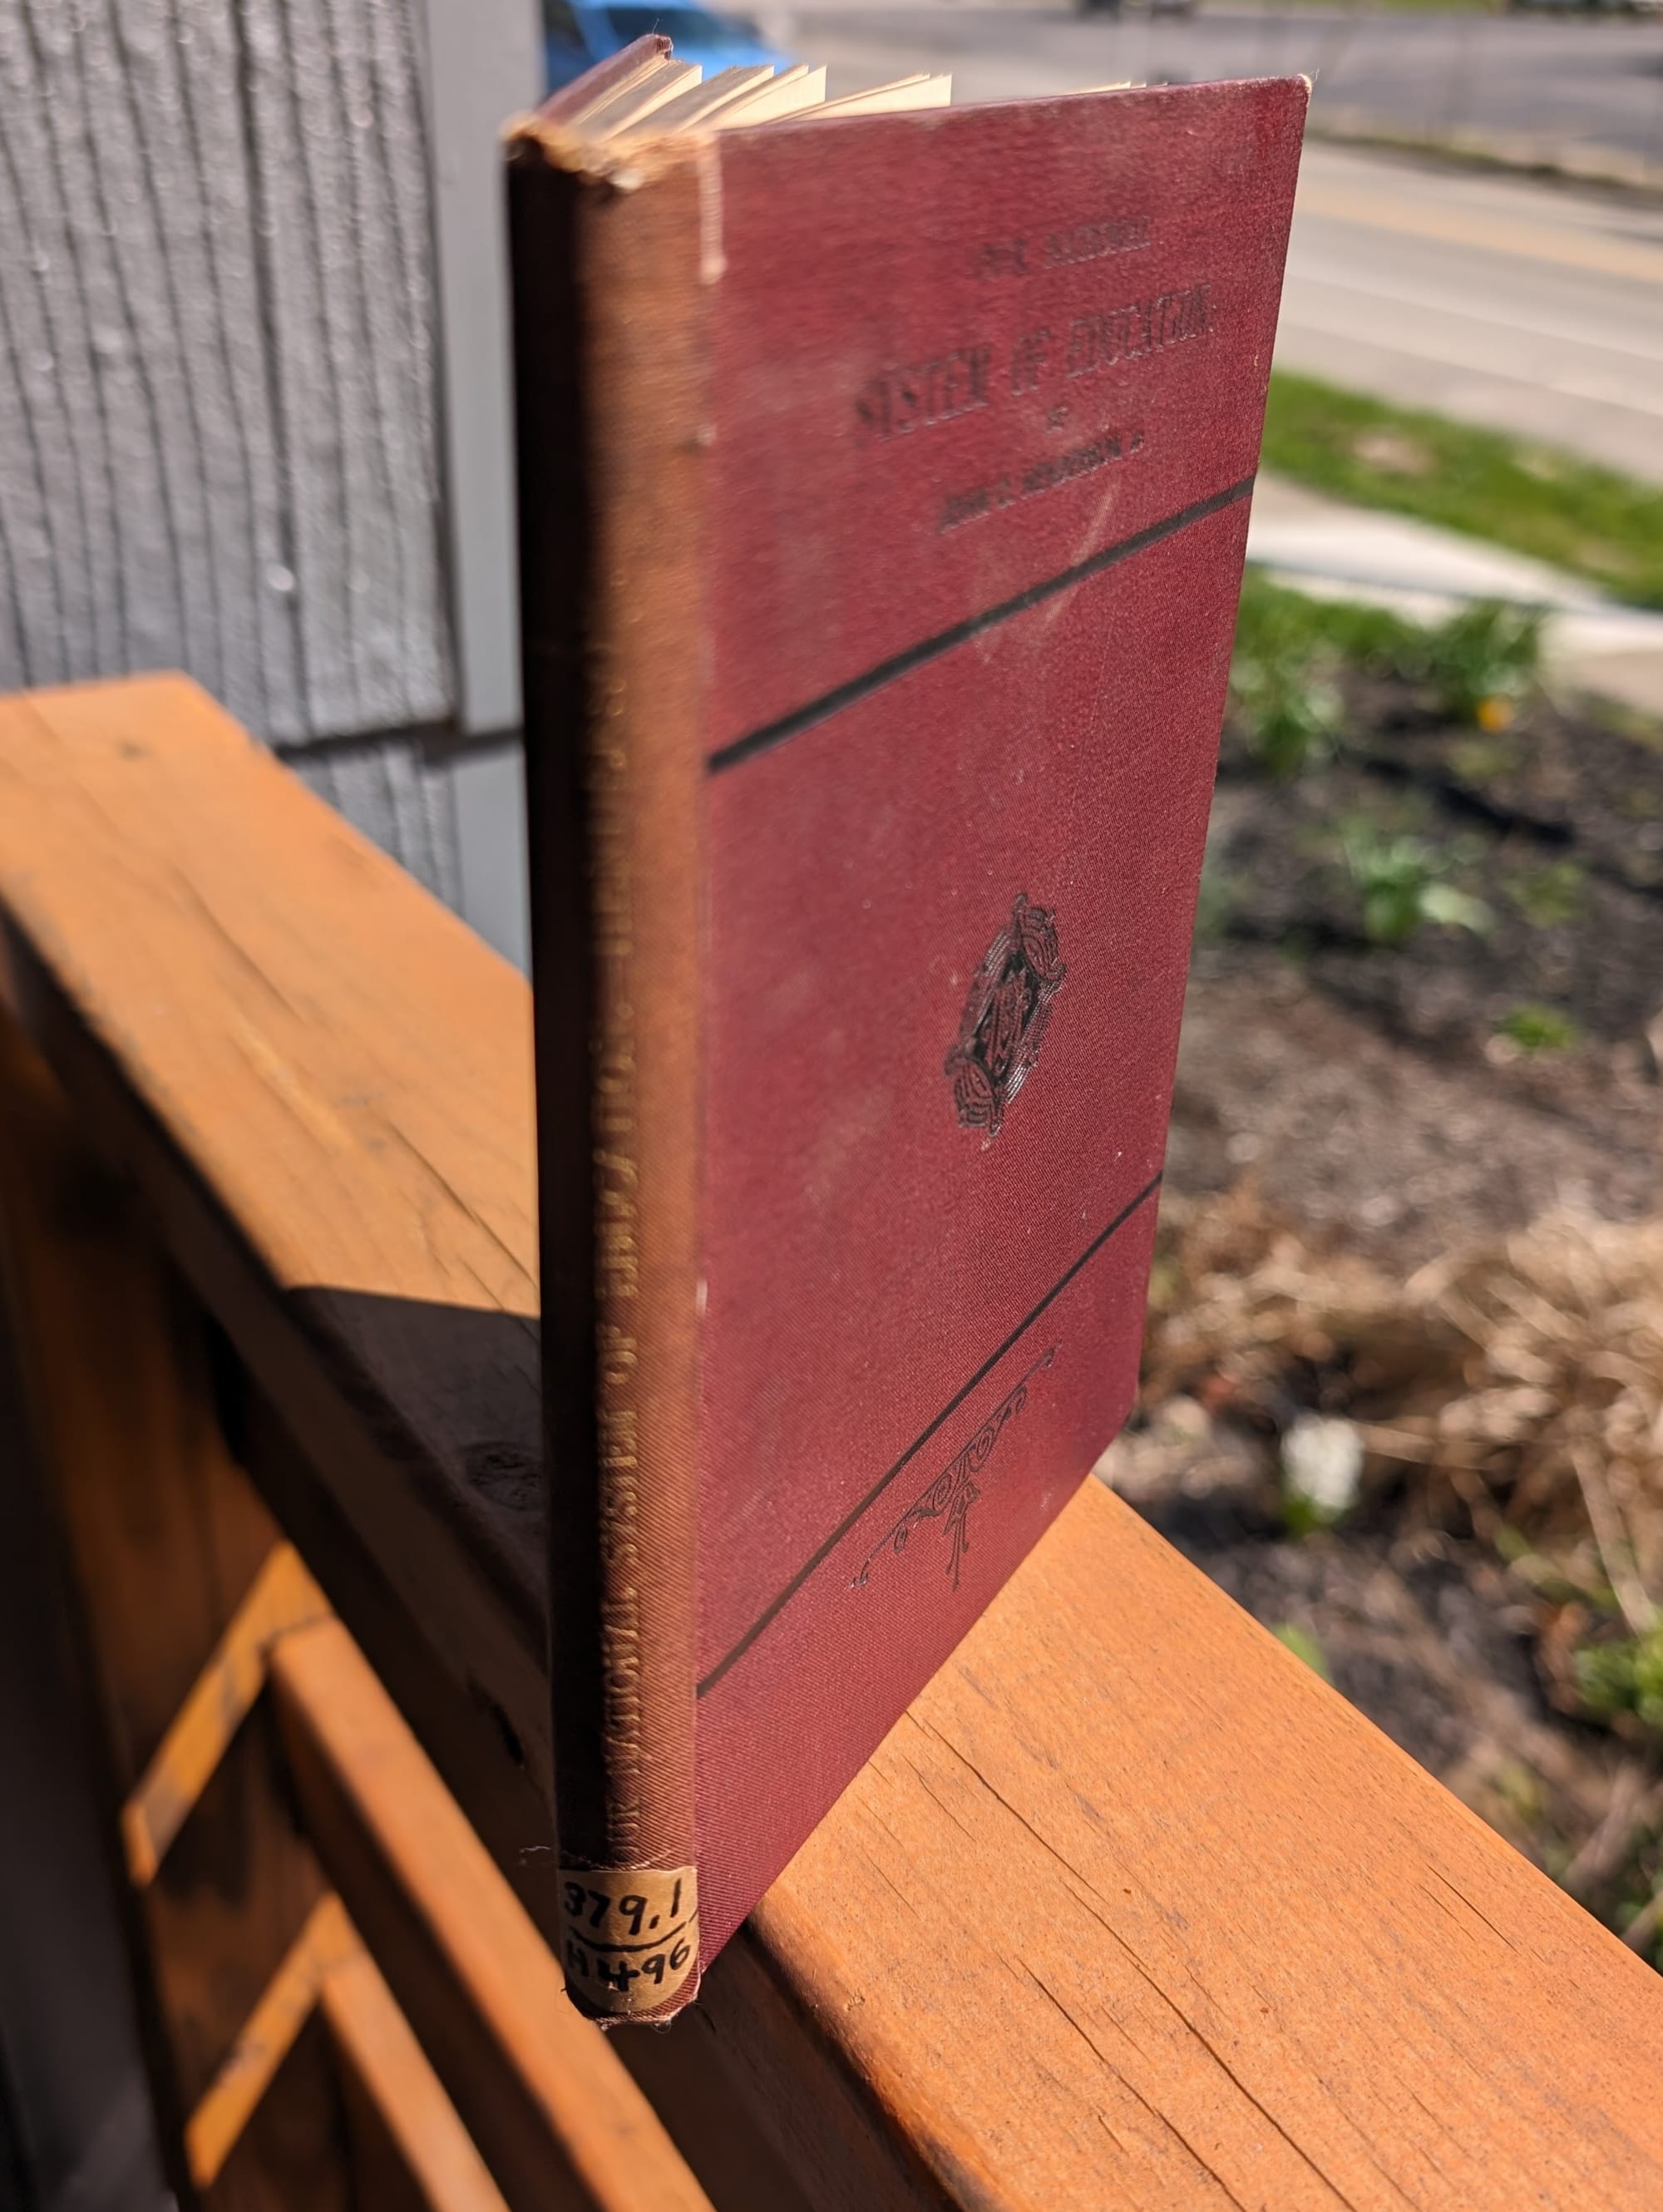 Photograph of Essay by Henderson. The book is sitting on a porch railing. There is a sticker that reads 379.1 on the spine.